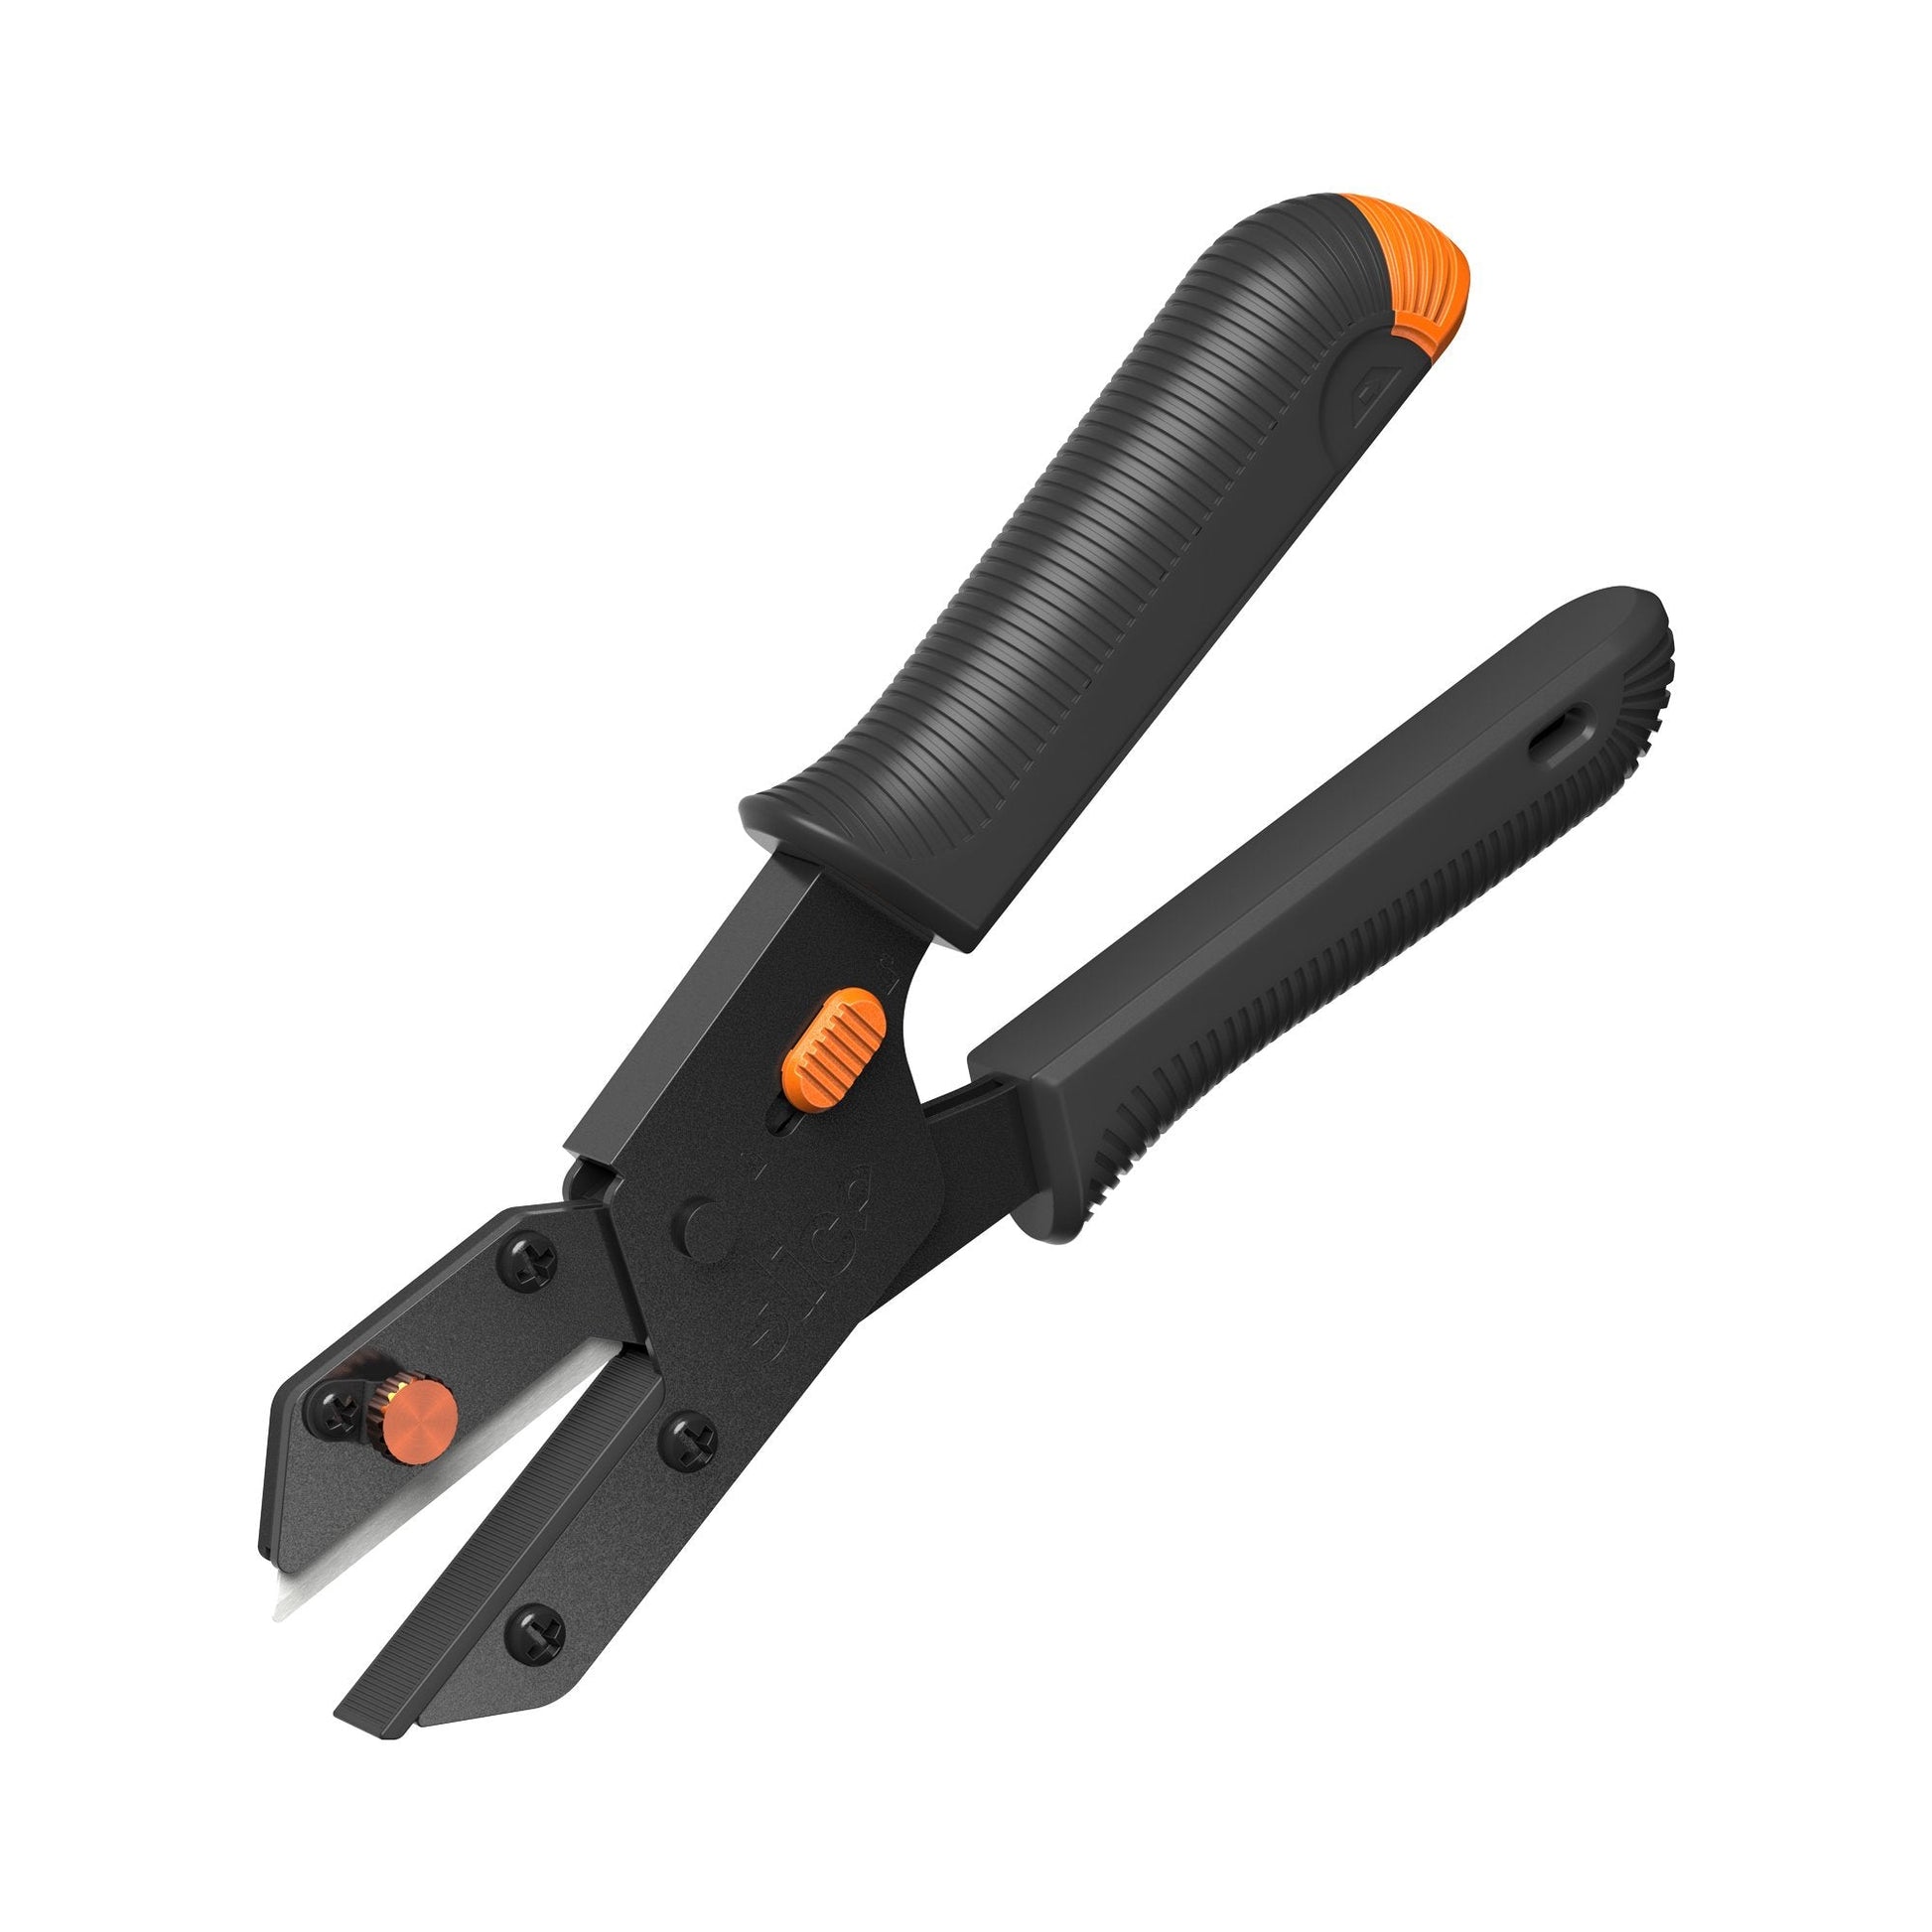 The Slice® 10479 Edge Utility Cutter